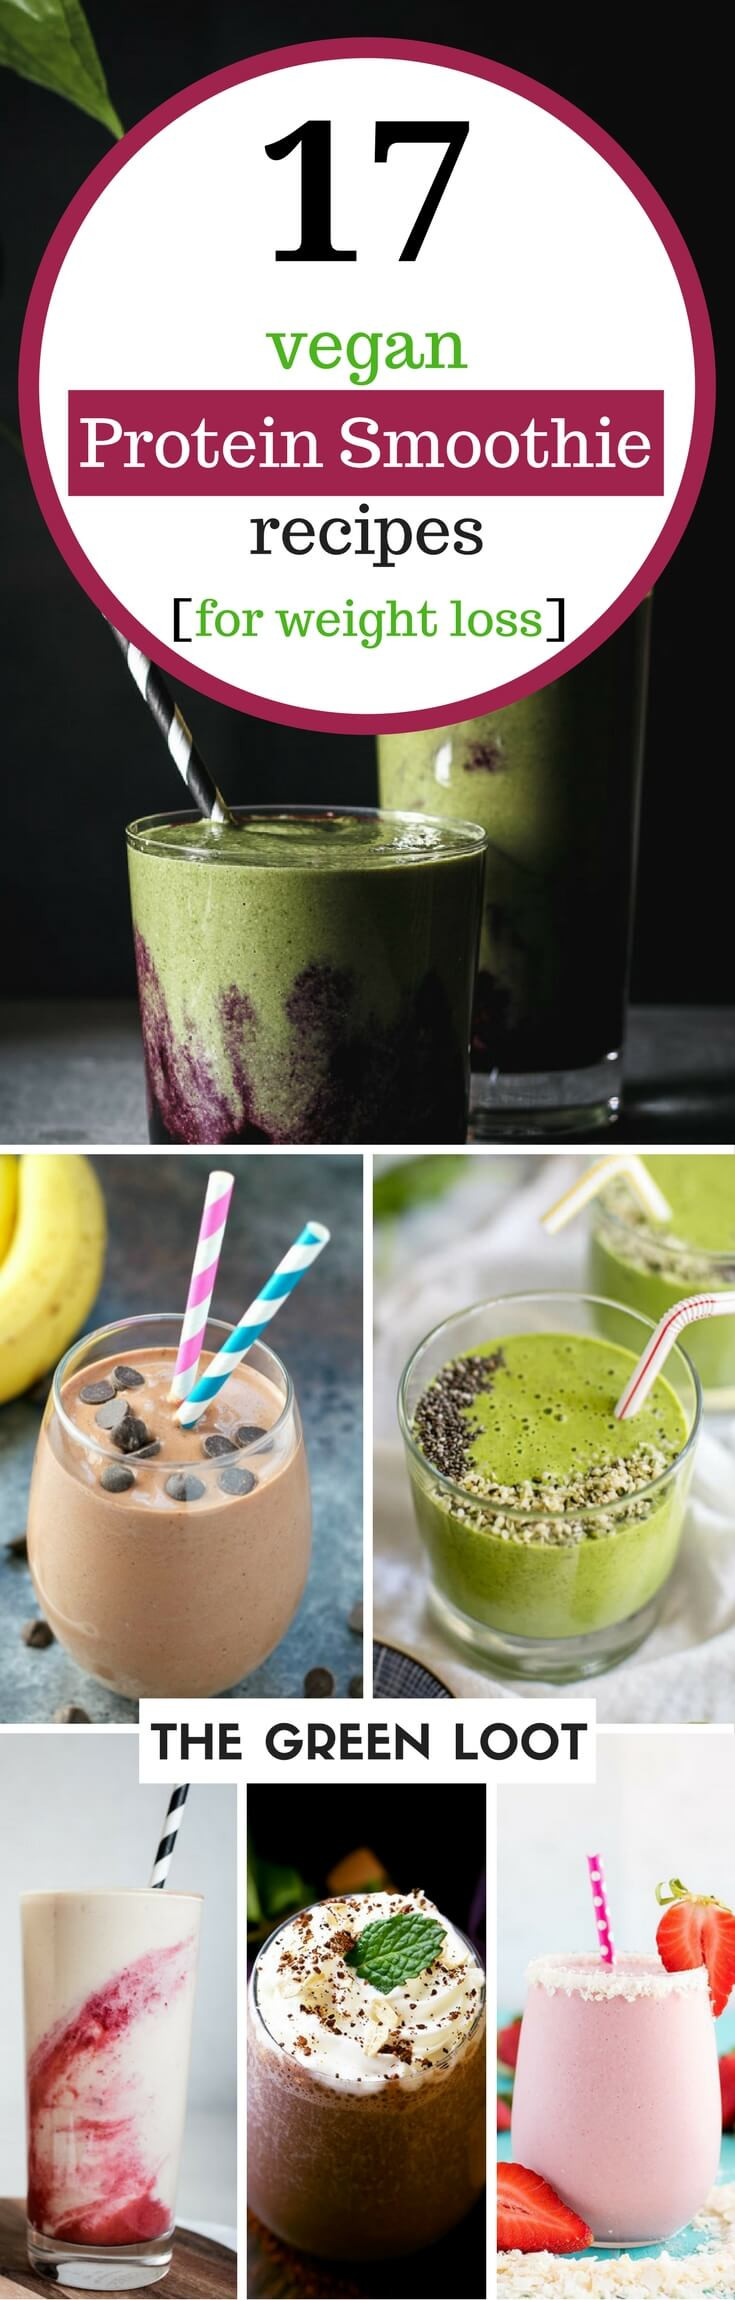 Dairy Free Weight Loss Smoothies
 17 Tasty Vegan Protein Smoothie Recipes for Weight Loss